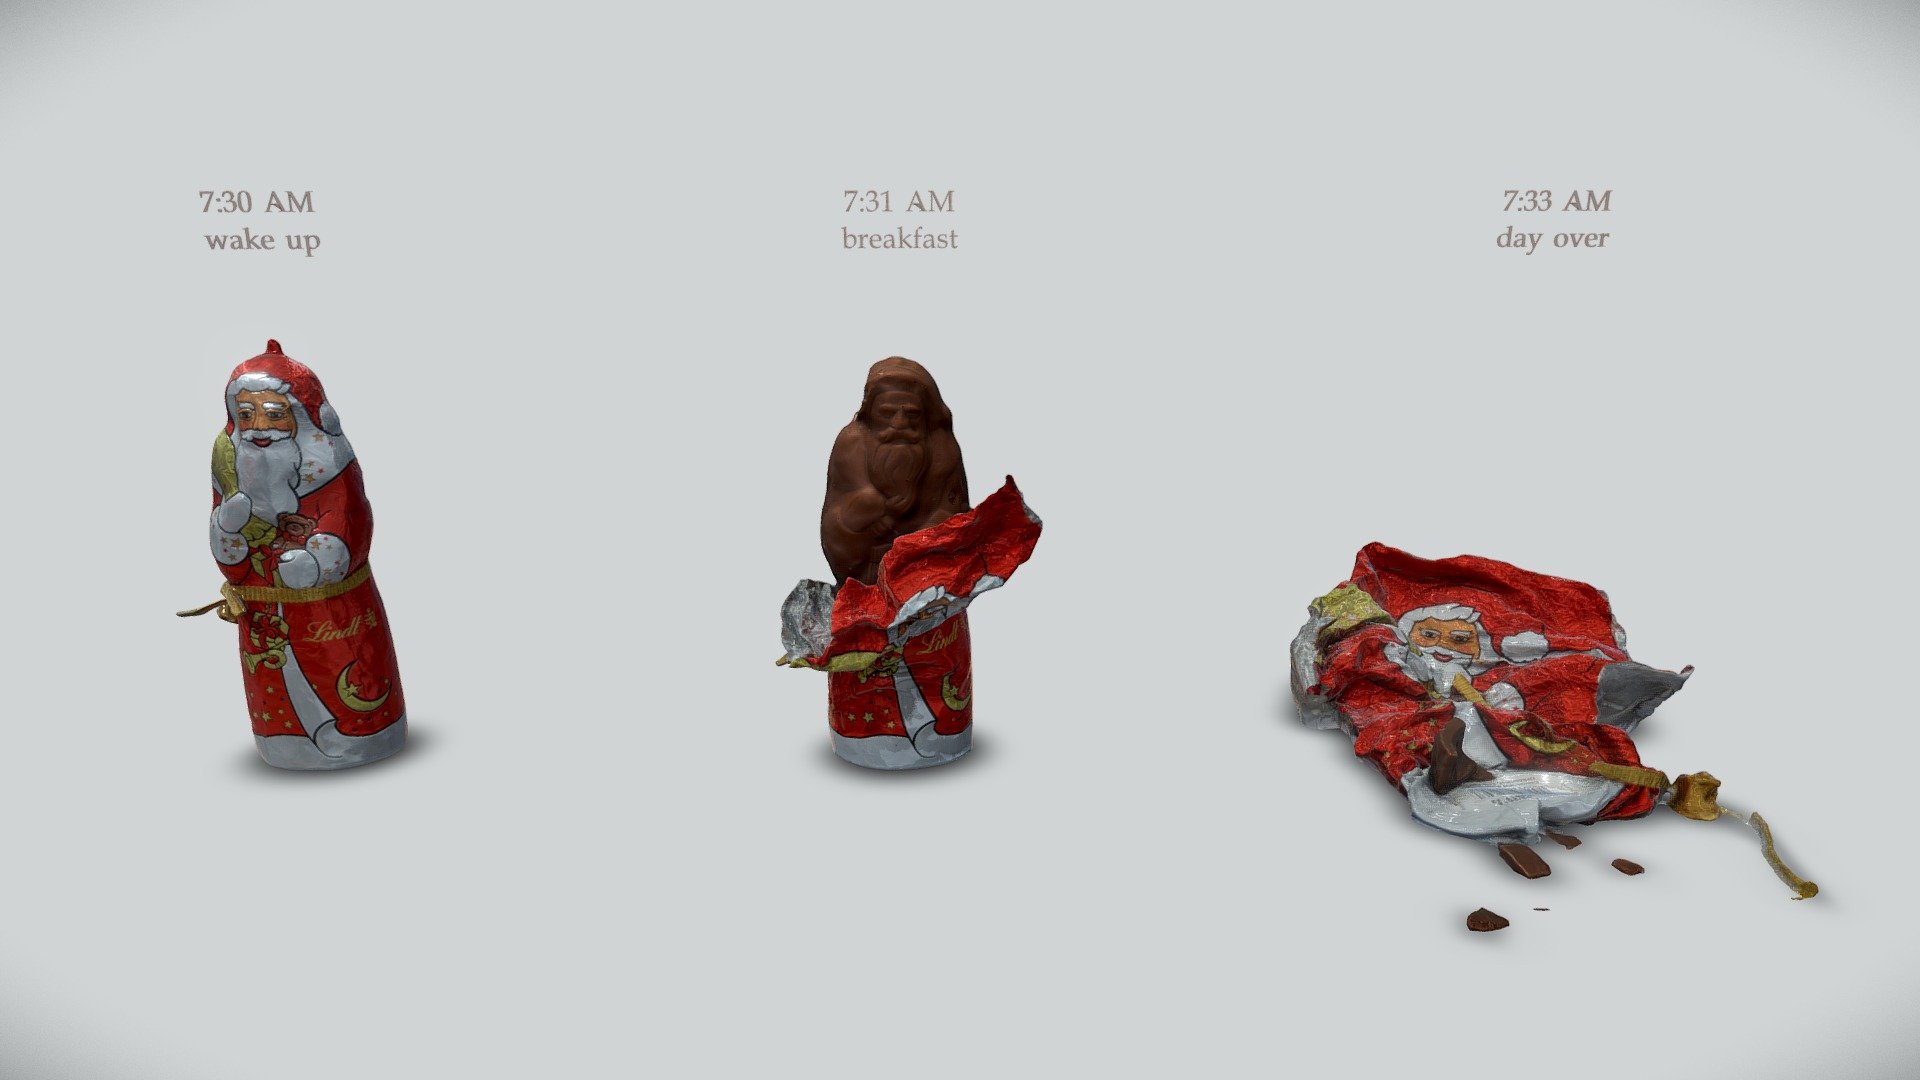 Daily schedule of chocolate St. Nicholas